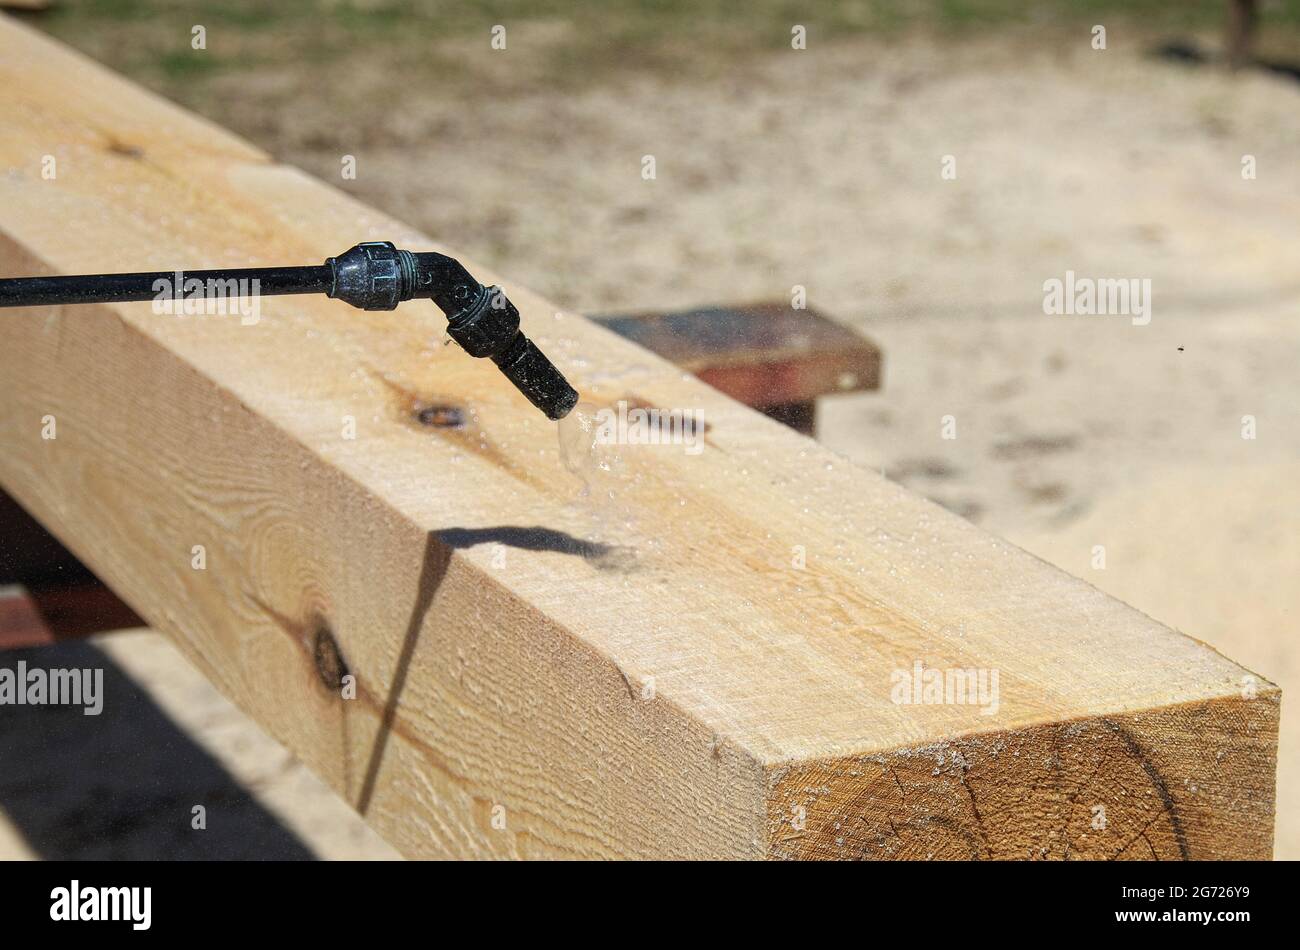 spraying wood preservative. protection of wood from mold. processing of timber with a chemical composition. Stock Photo